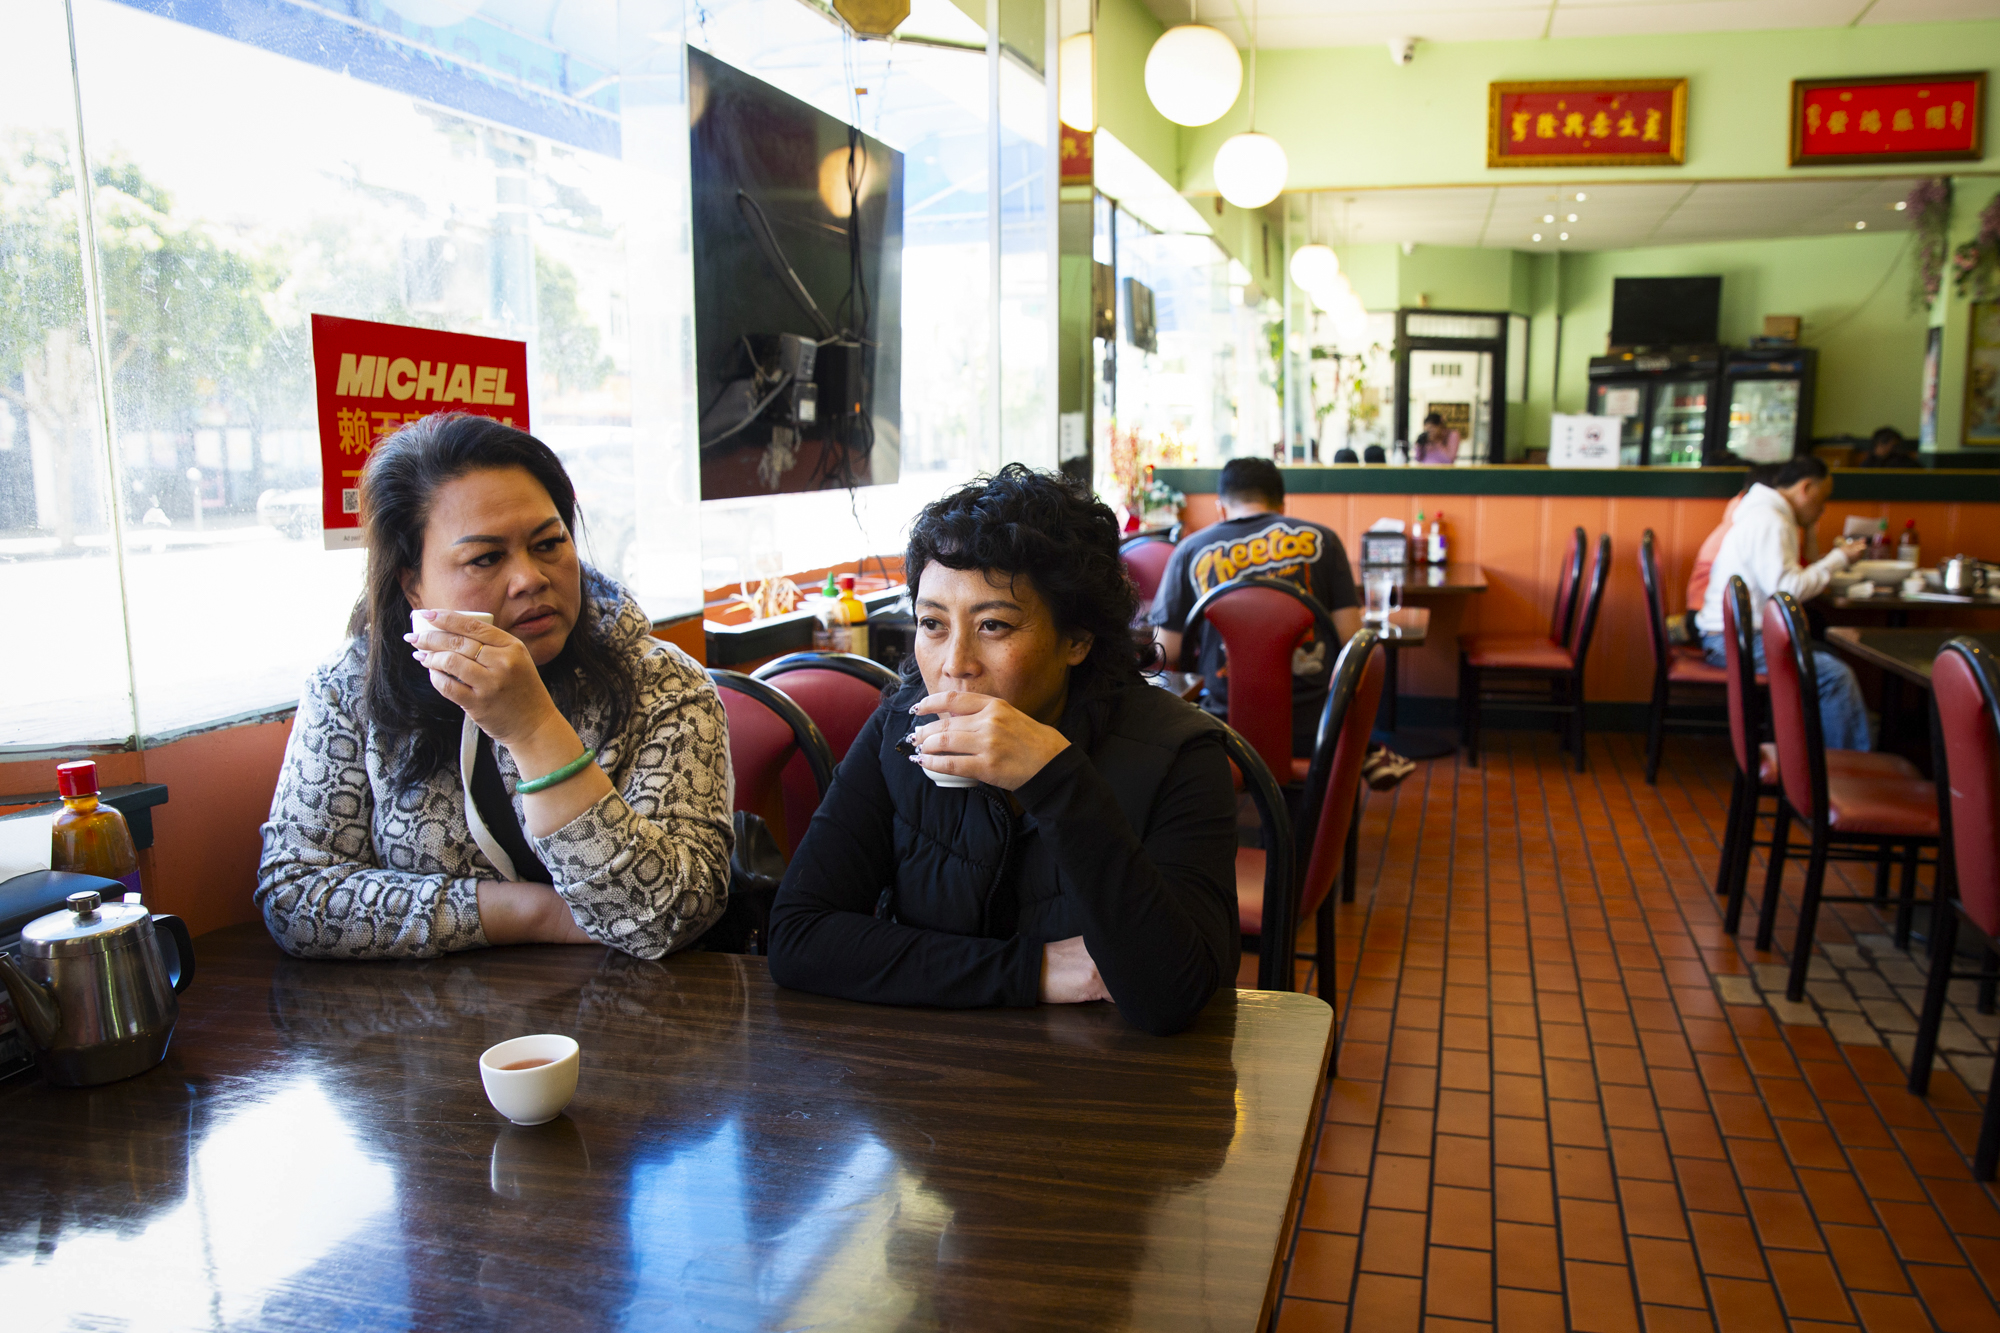 Two women sit at a booth and sip tea inside a restaurant.